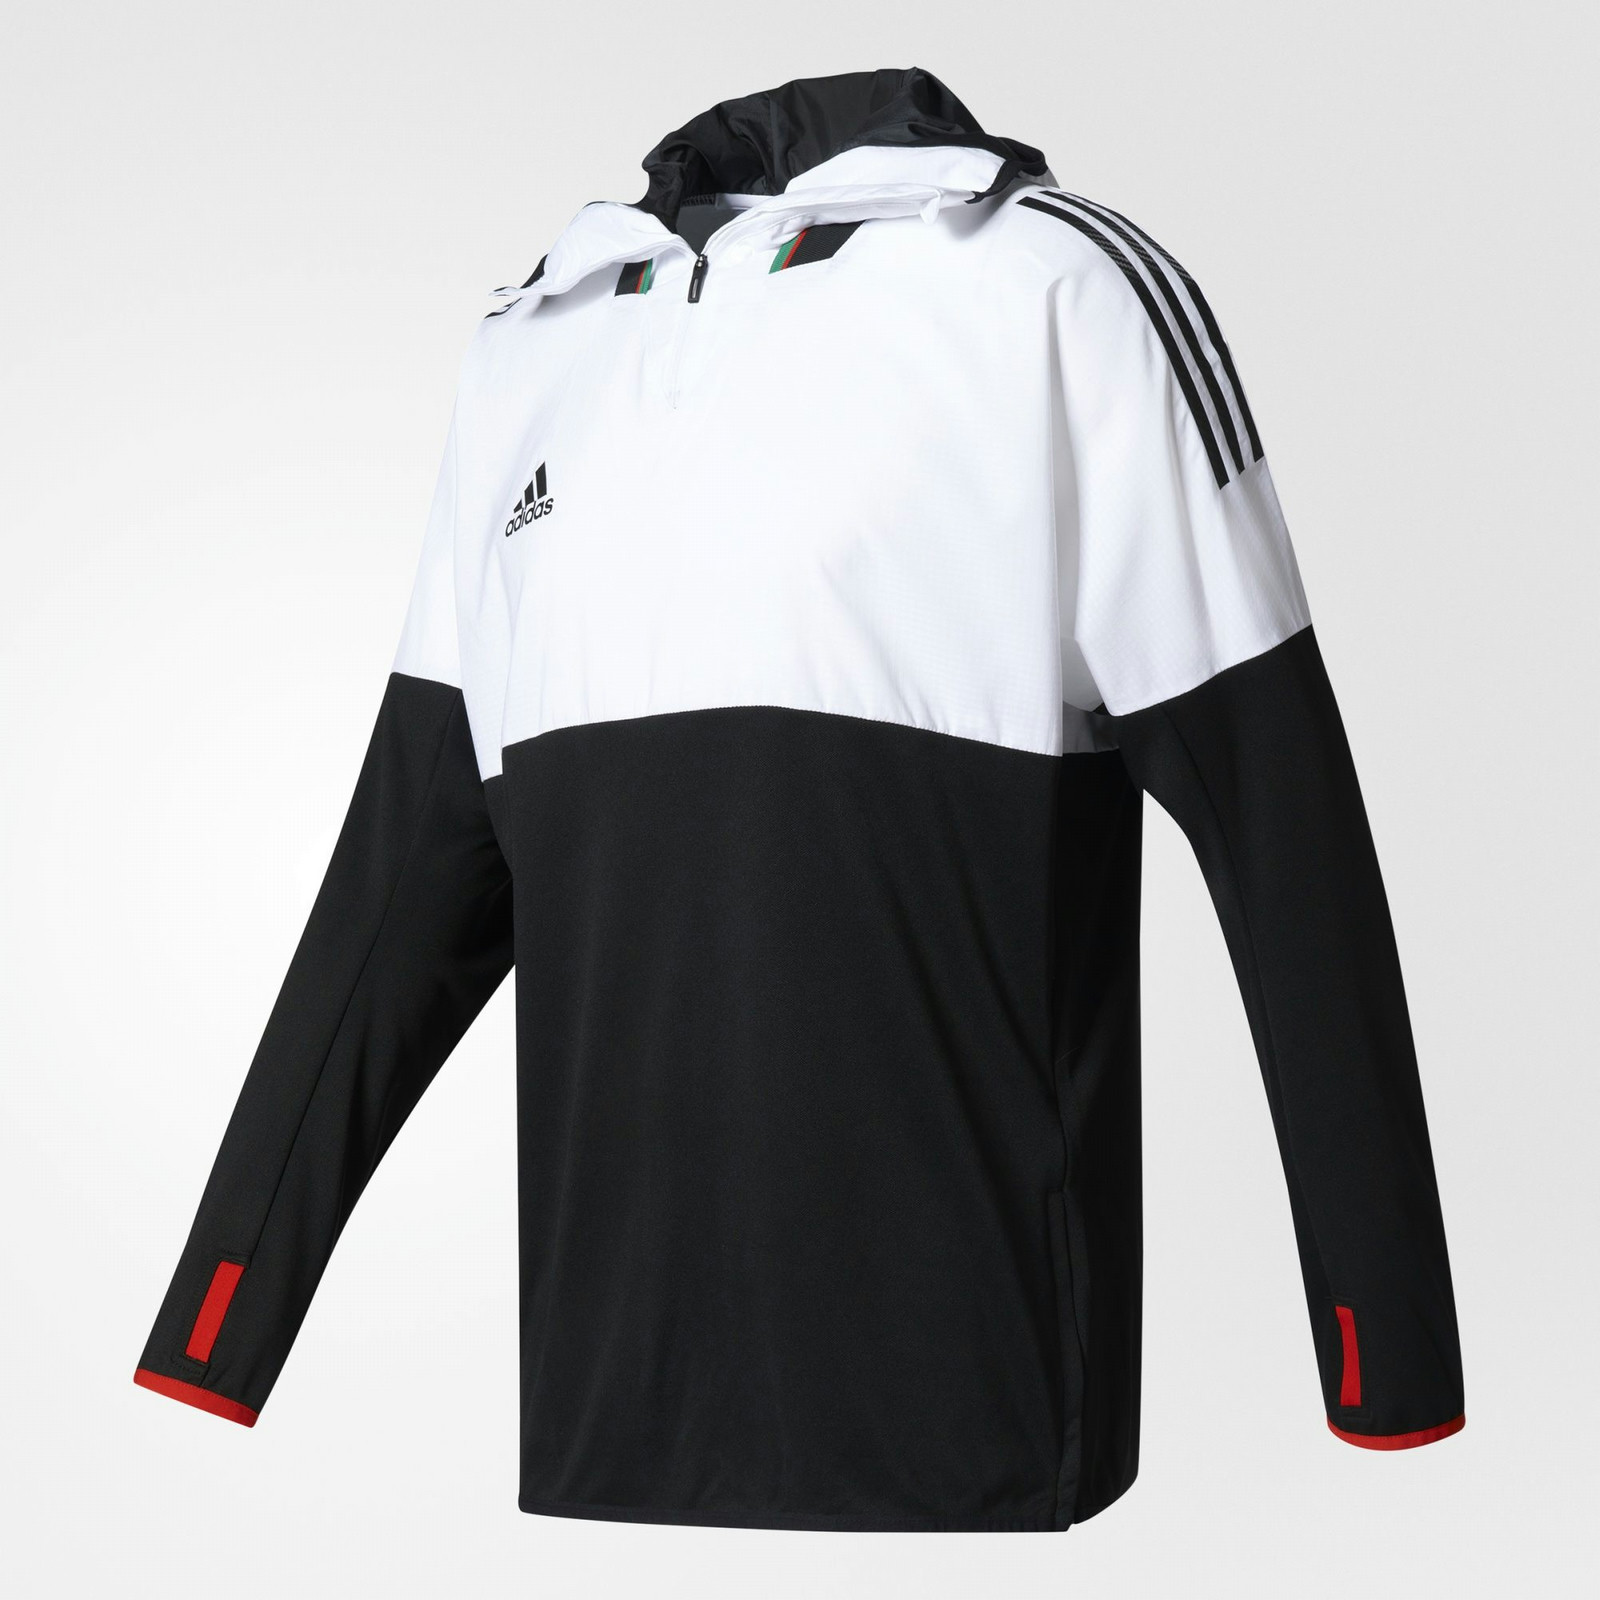 Martin Luther King Junior Zus toediening Adidas Tango Future Training Jacket Hot Sale, SAVE 54% - icarus.photos